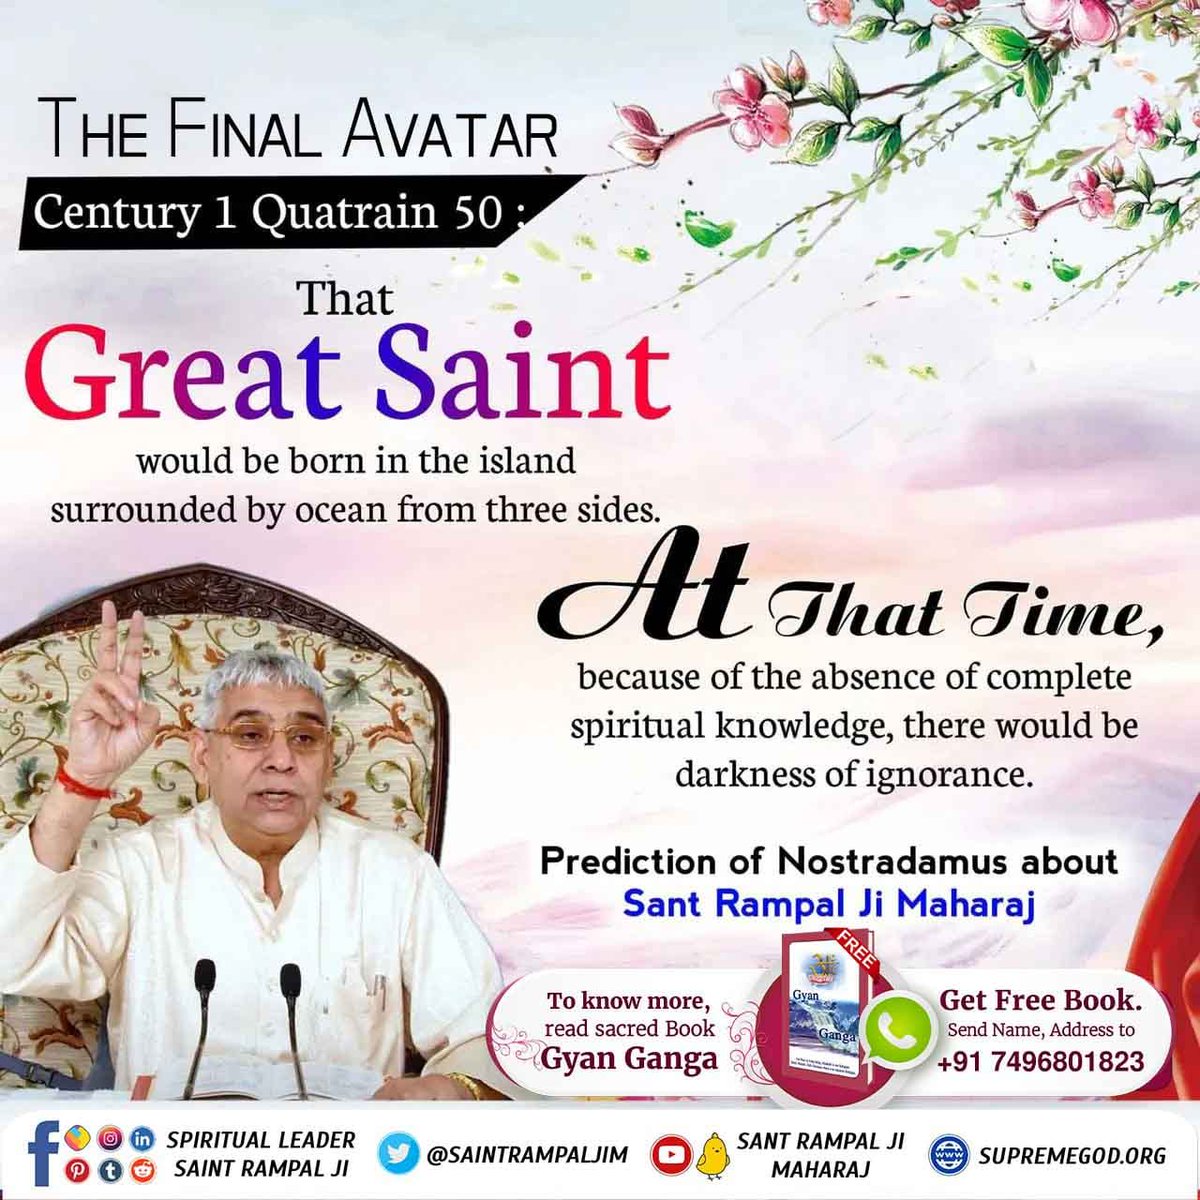 #GodMornimgFriday 
#आदि_सनातनधर्म_होगाप्रतिष्ठित
THE FINAL AVATAR
Century 1 Quatrain 50:
That Great Saint
would be born in the island surrounded by ocean from three sides........?